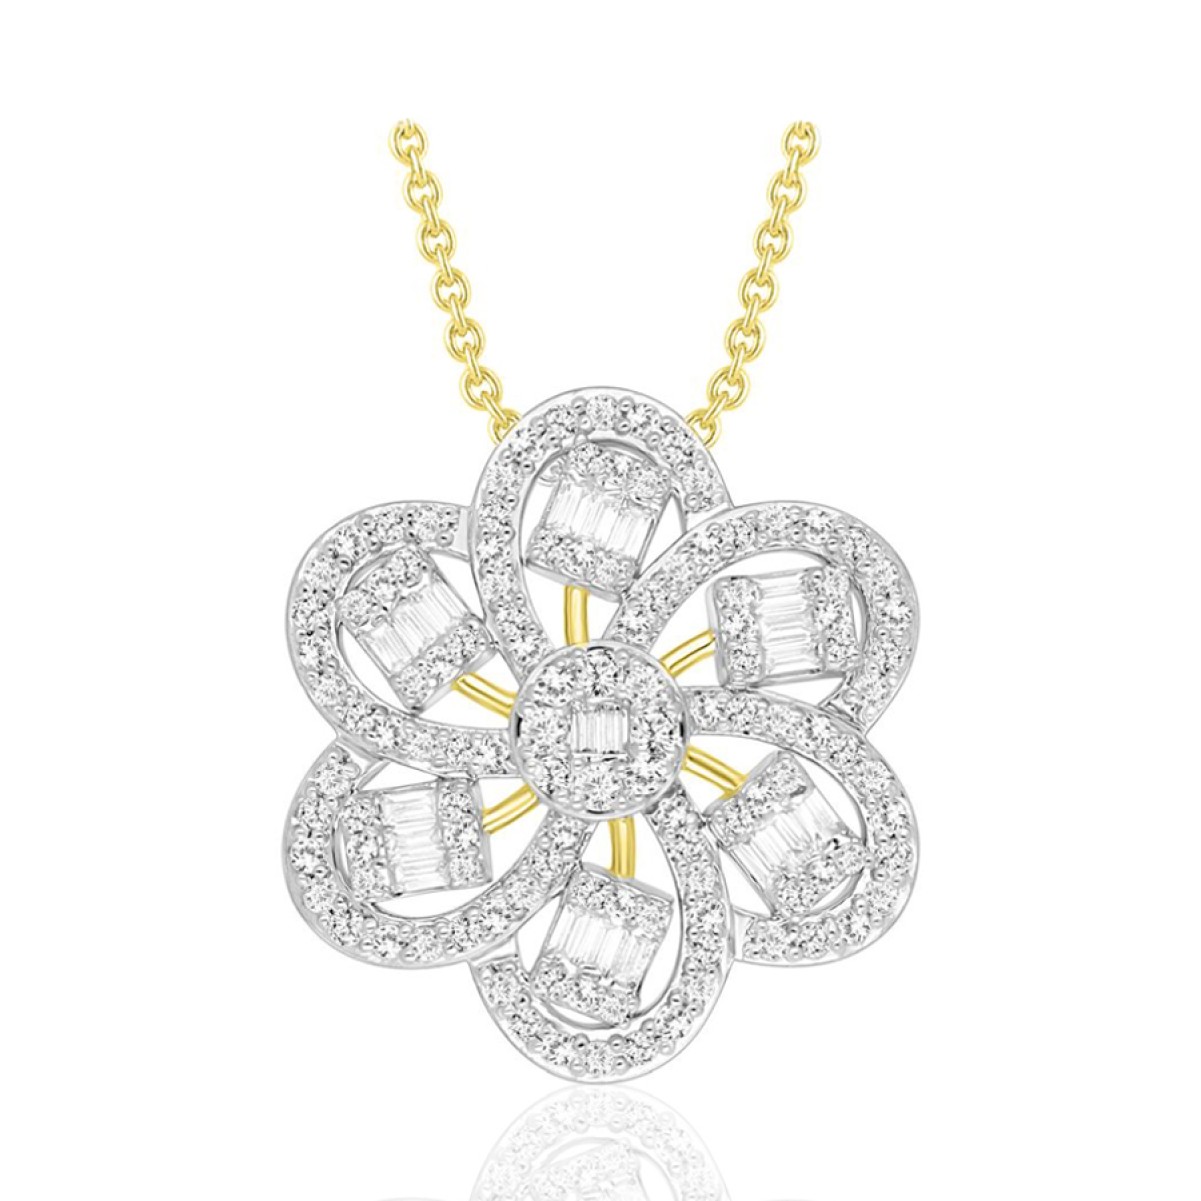 14K YELLOW GOLD 1CT ROUND/BAGUETTE DIAMOND LADIES PENDANT WITH CHAIN  